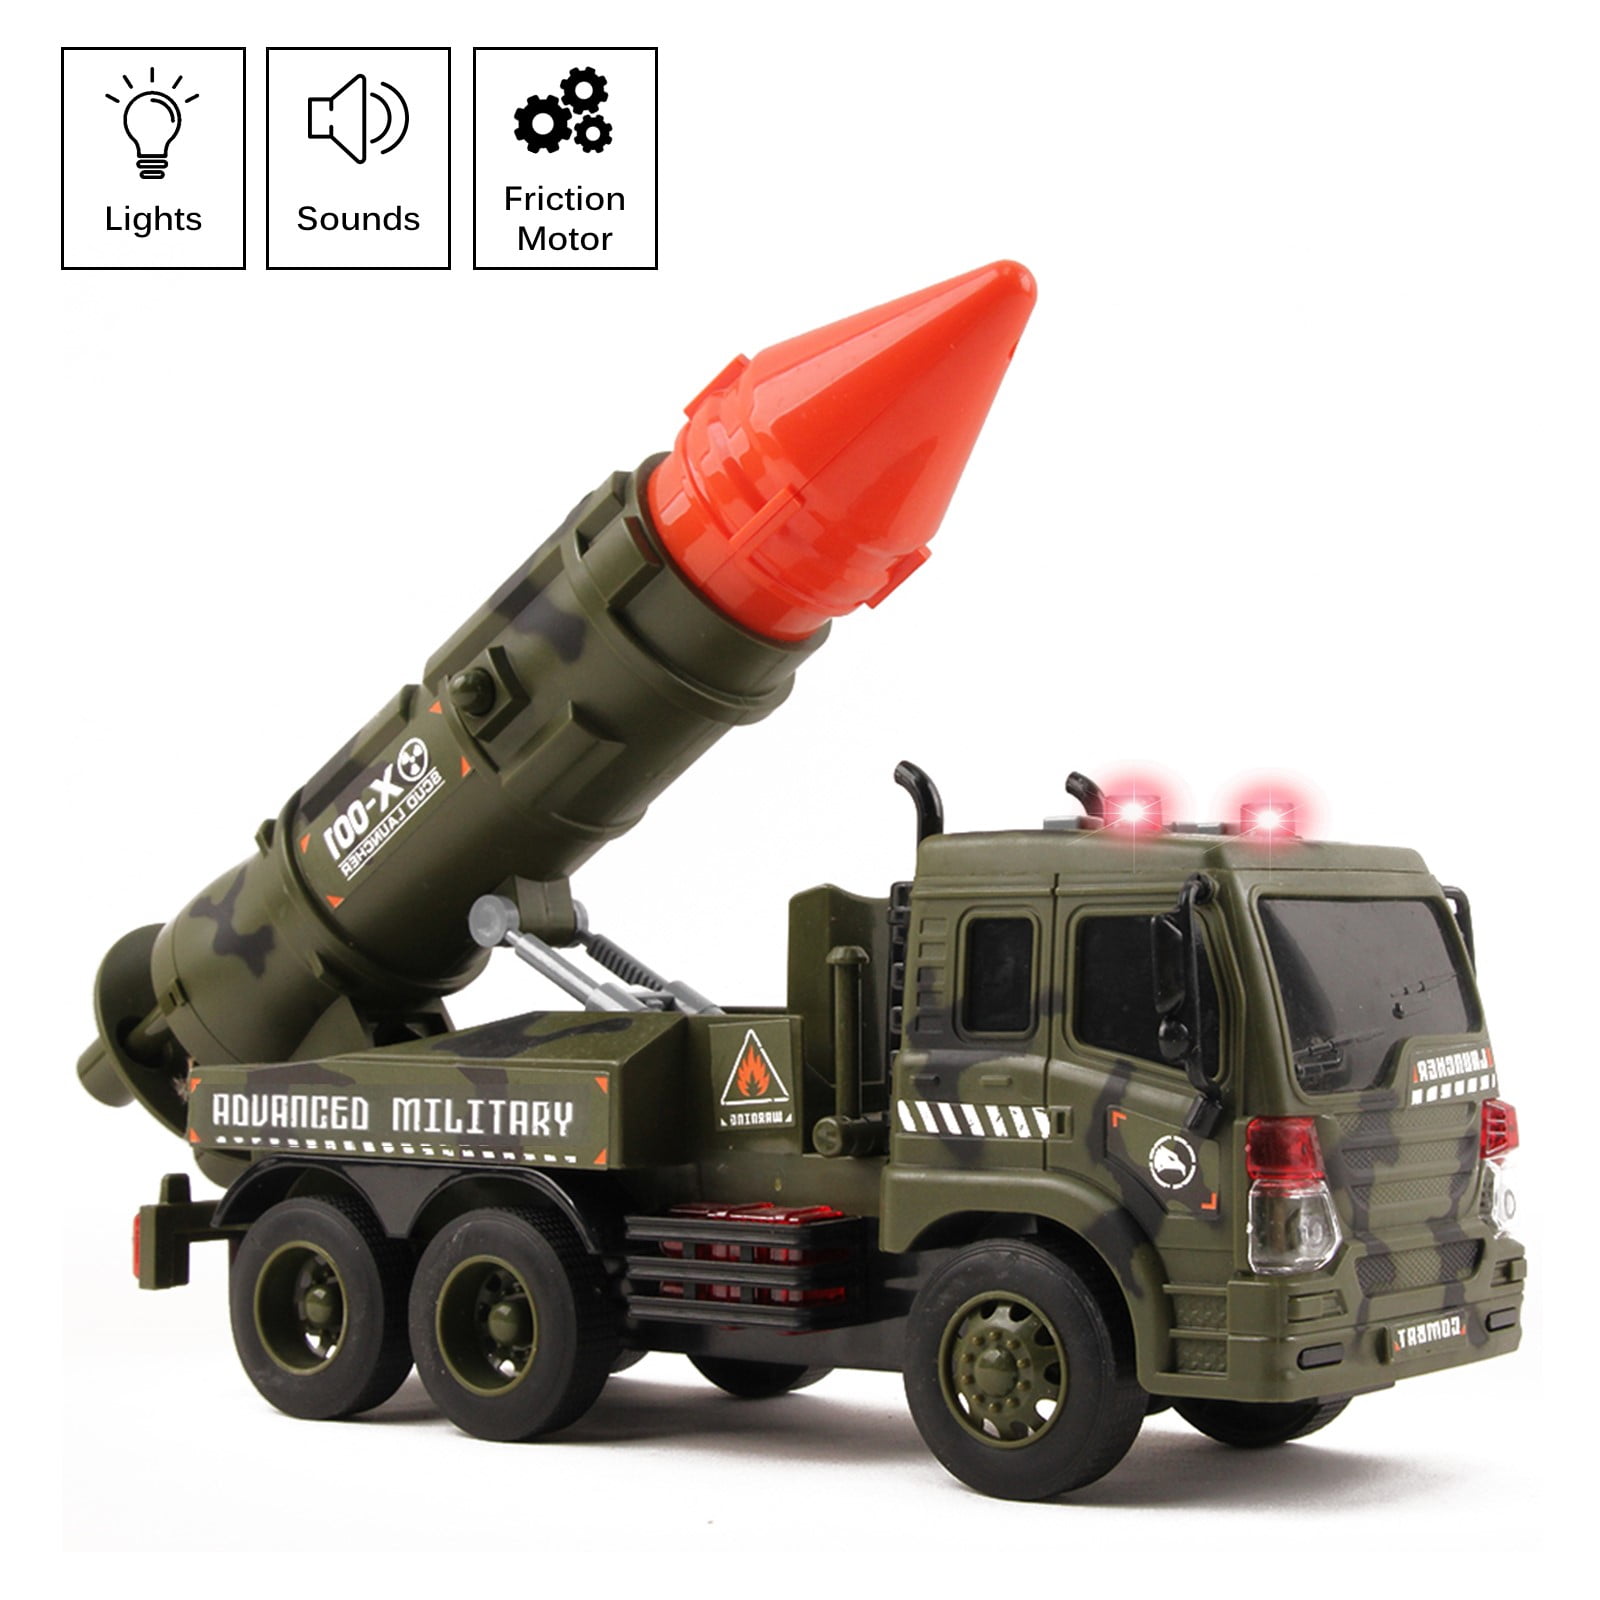 Vokodo Toy Military Launcher Truck Push And Go With Lights And Sounds TE-75 